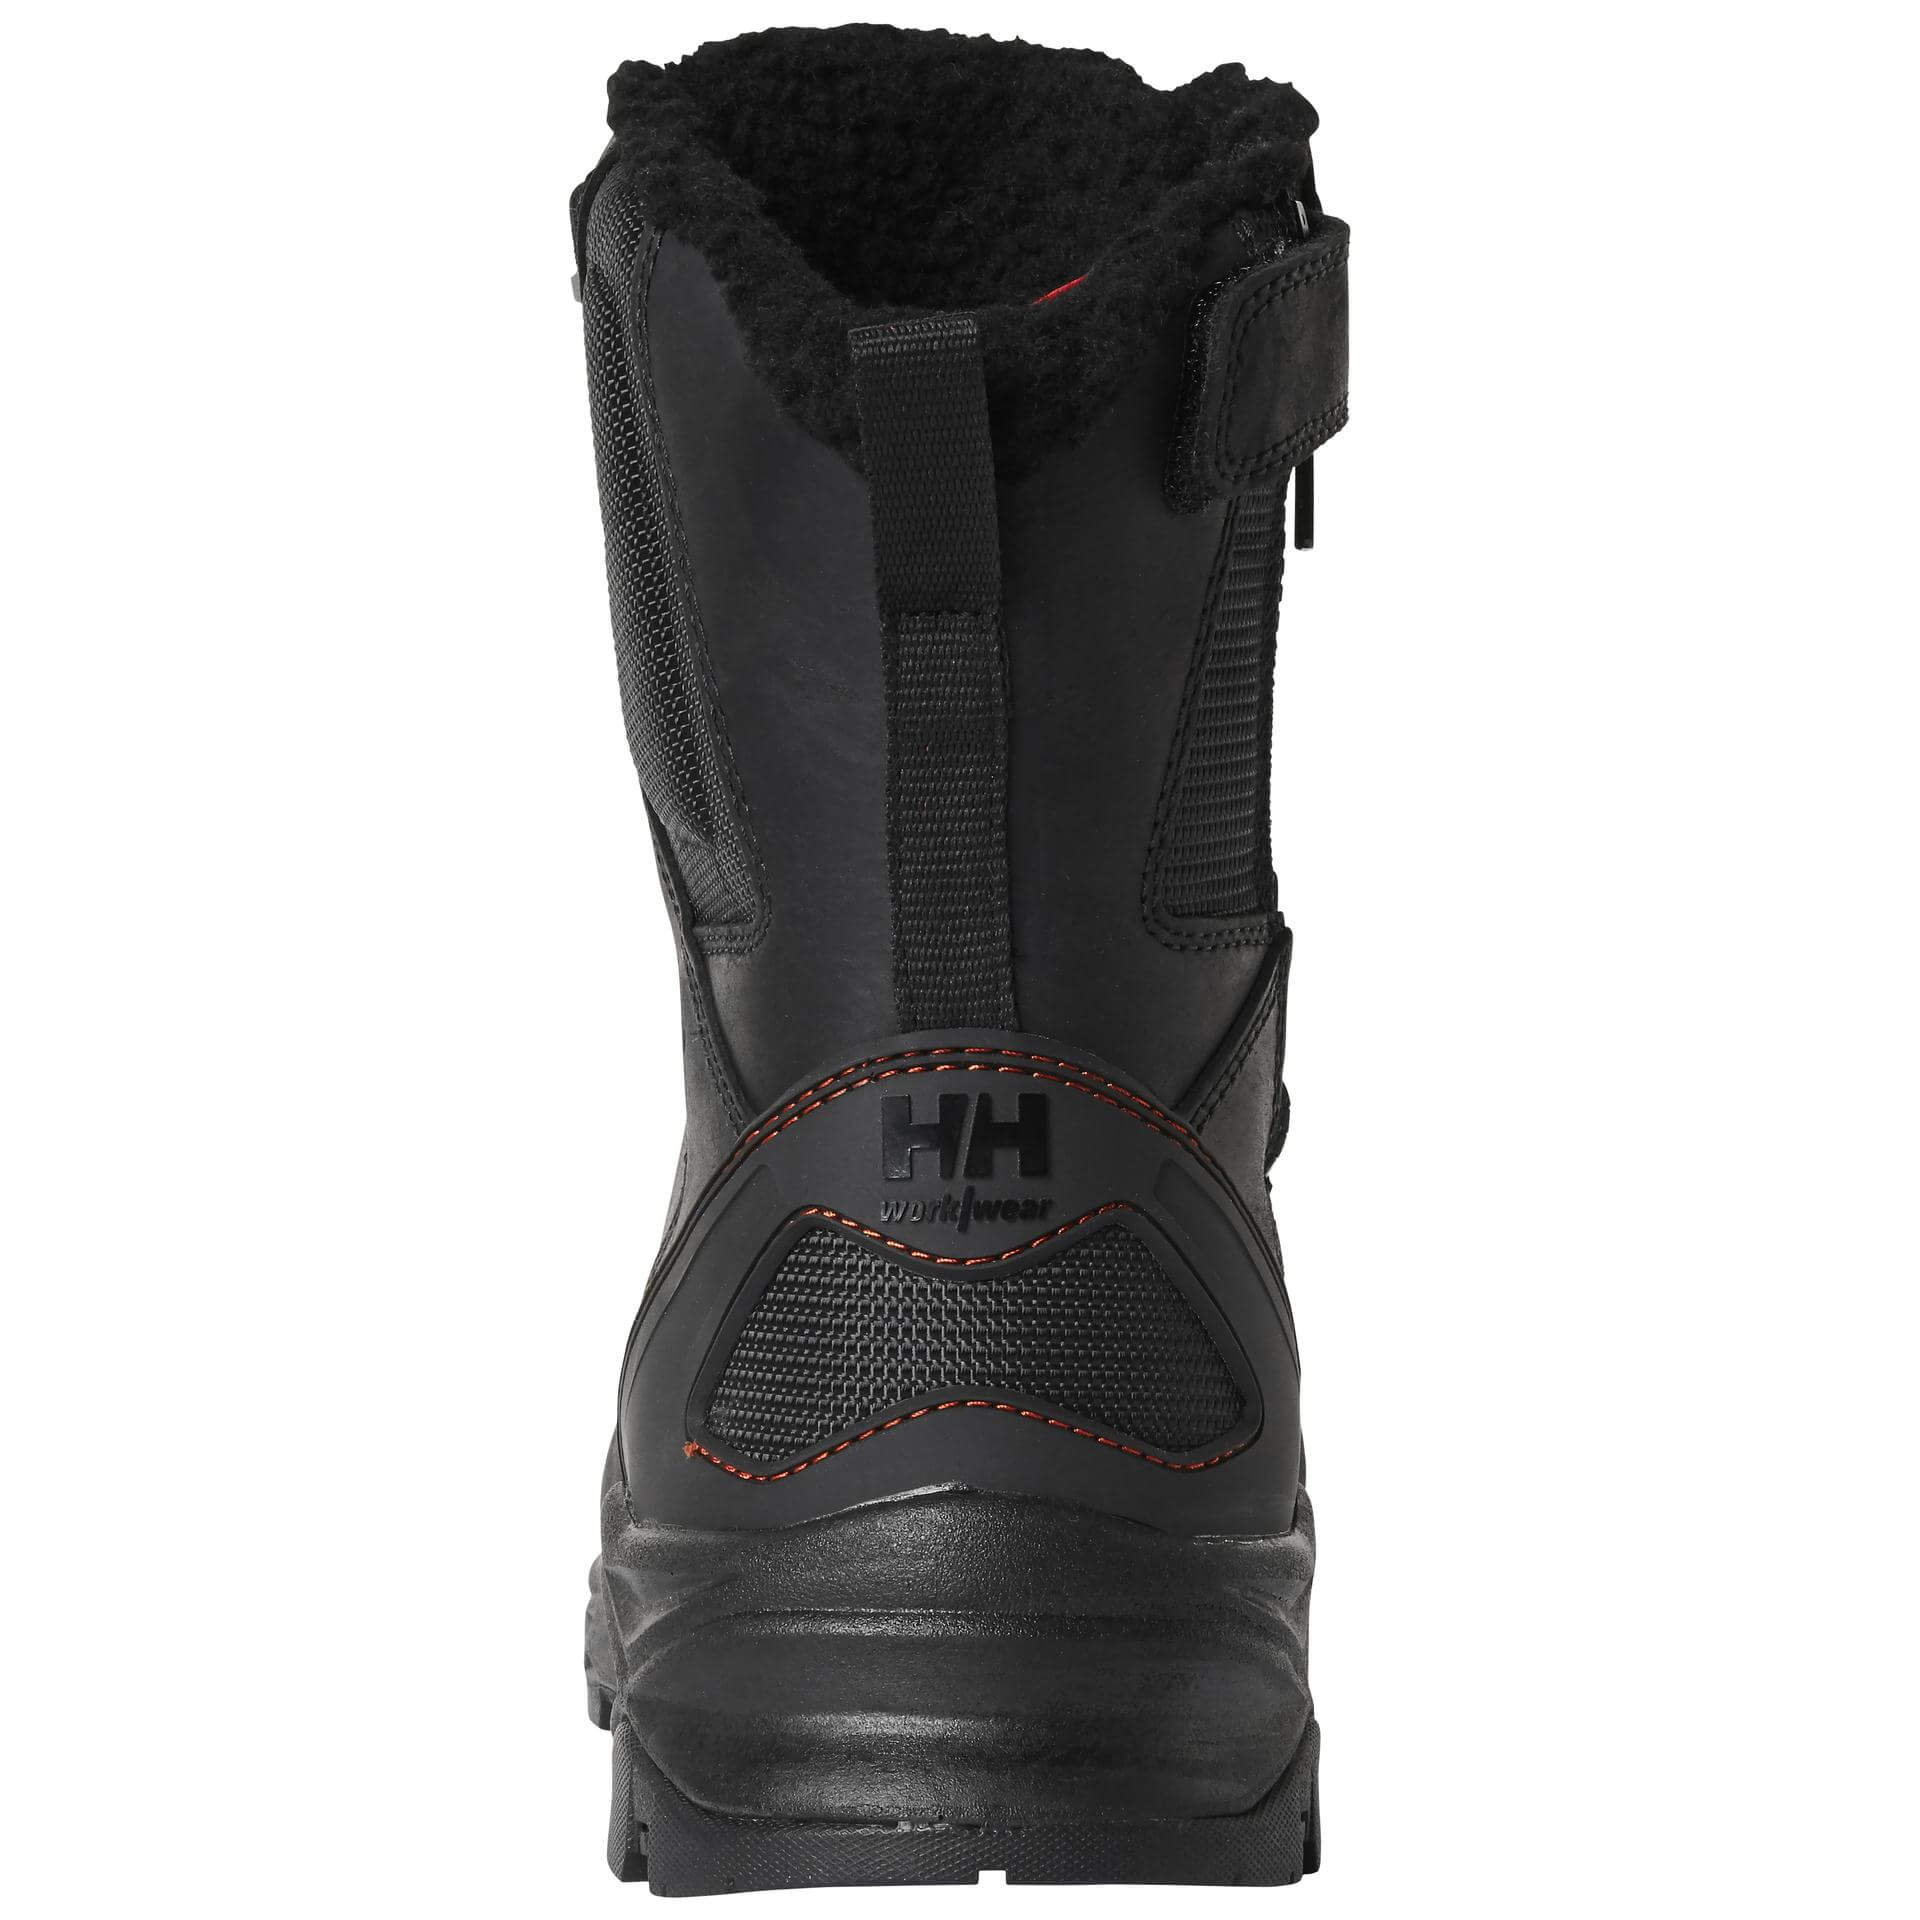 Helly Hansen Oxford Insulated Tall?Composite Toe Cap Winter Safety Work Boots - 78405 - Sale